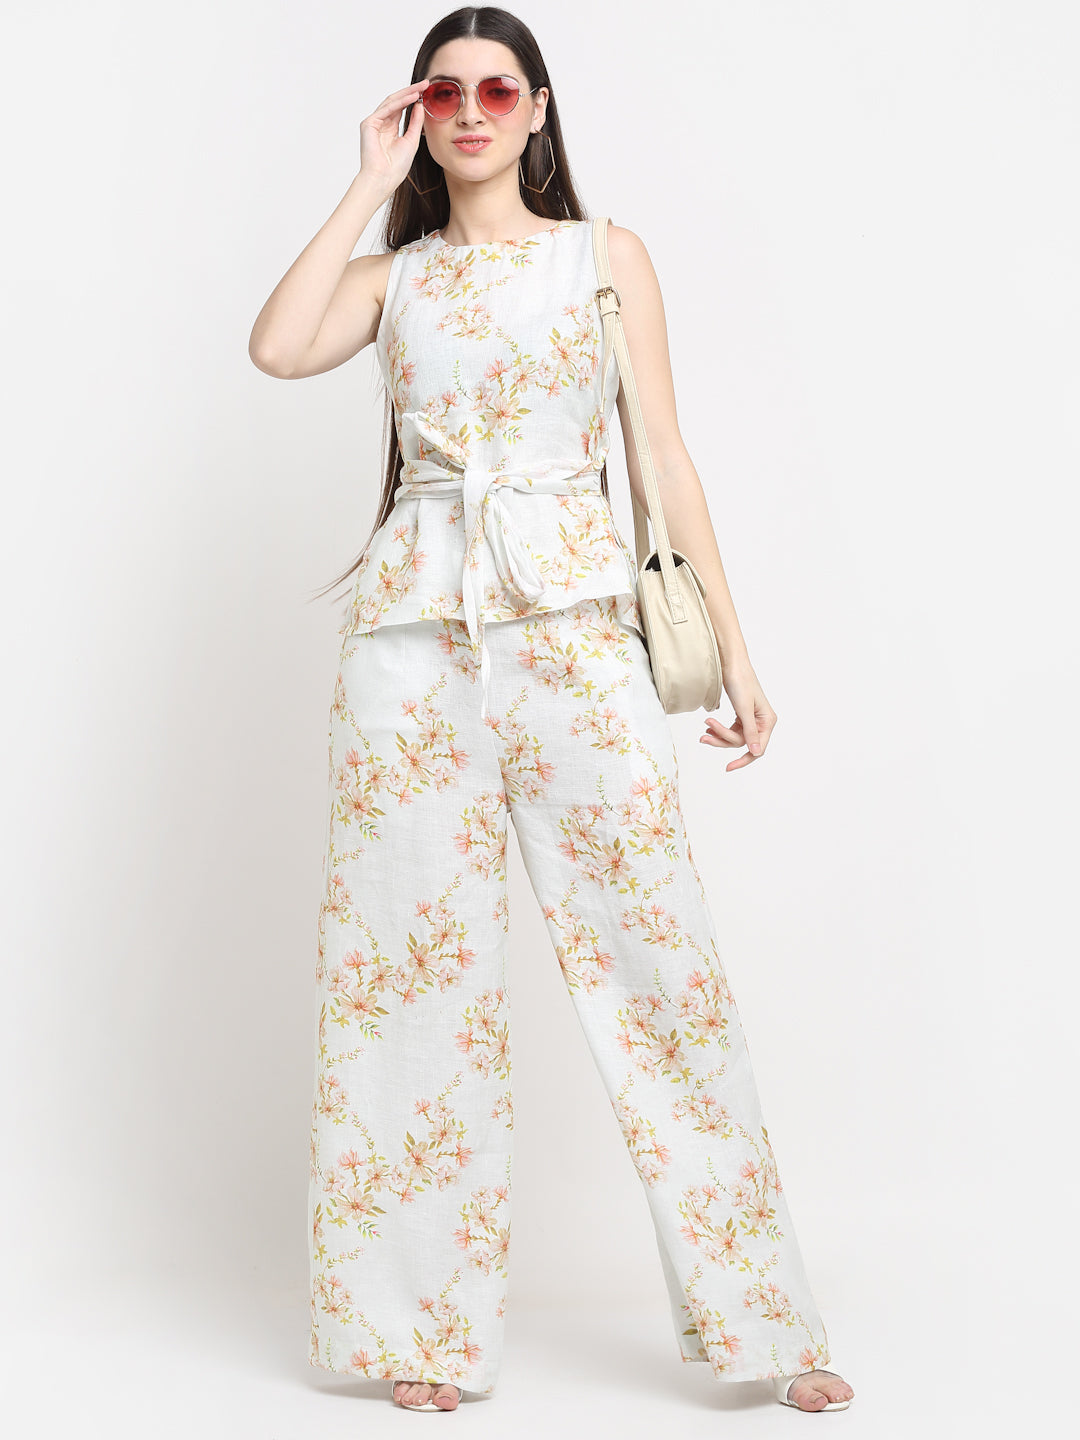 Certified Hemp White Printed Casual Co-ord Set at Kamakhyaa by Ewoke. This item is Best Selling, Casual Wear, Co-ord Sets, Festive 23, Hemp, Natural with azo free dyes, Prints, Regular Fit, Travel Co-ords, White, Womenswear